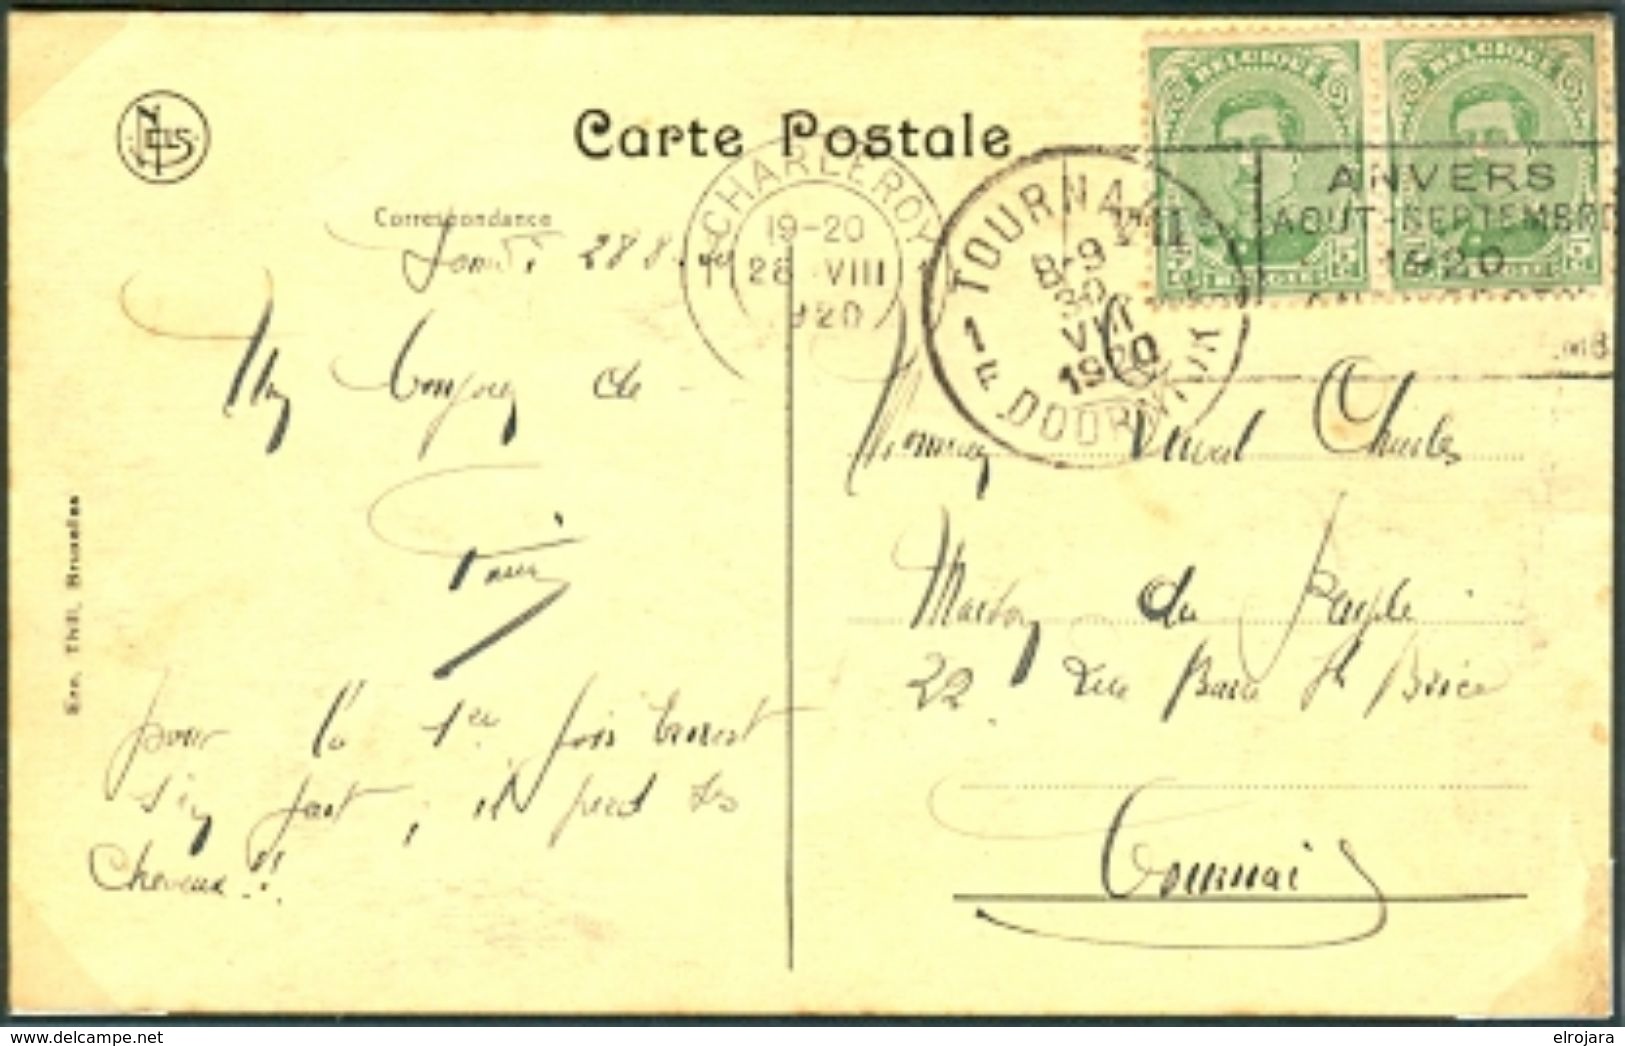 BELGIUM Postcard With Olympic Machine Cancel Charleroy 1 Dated 28-VIII 1920 Waterpolo/Soccer Day - Estate 1920: Anversa